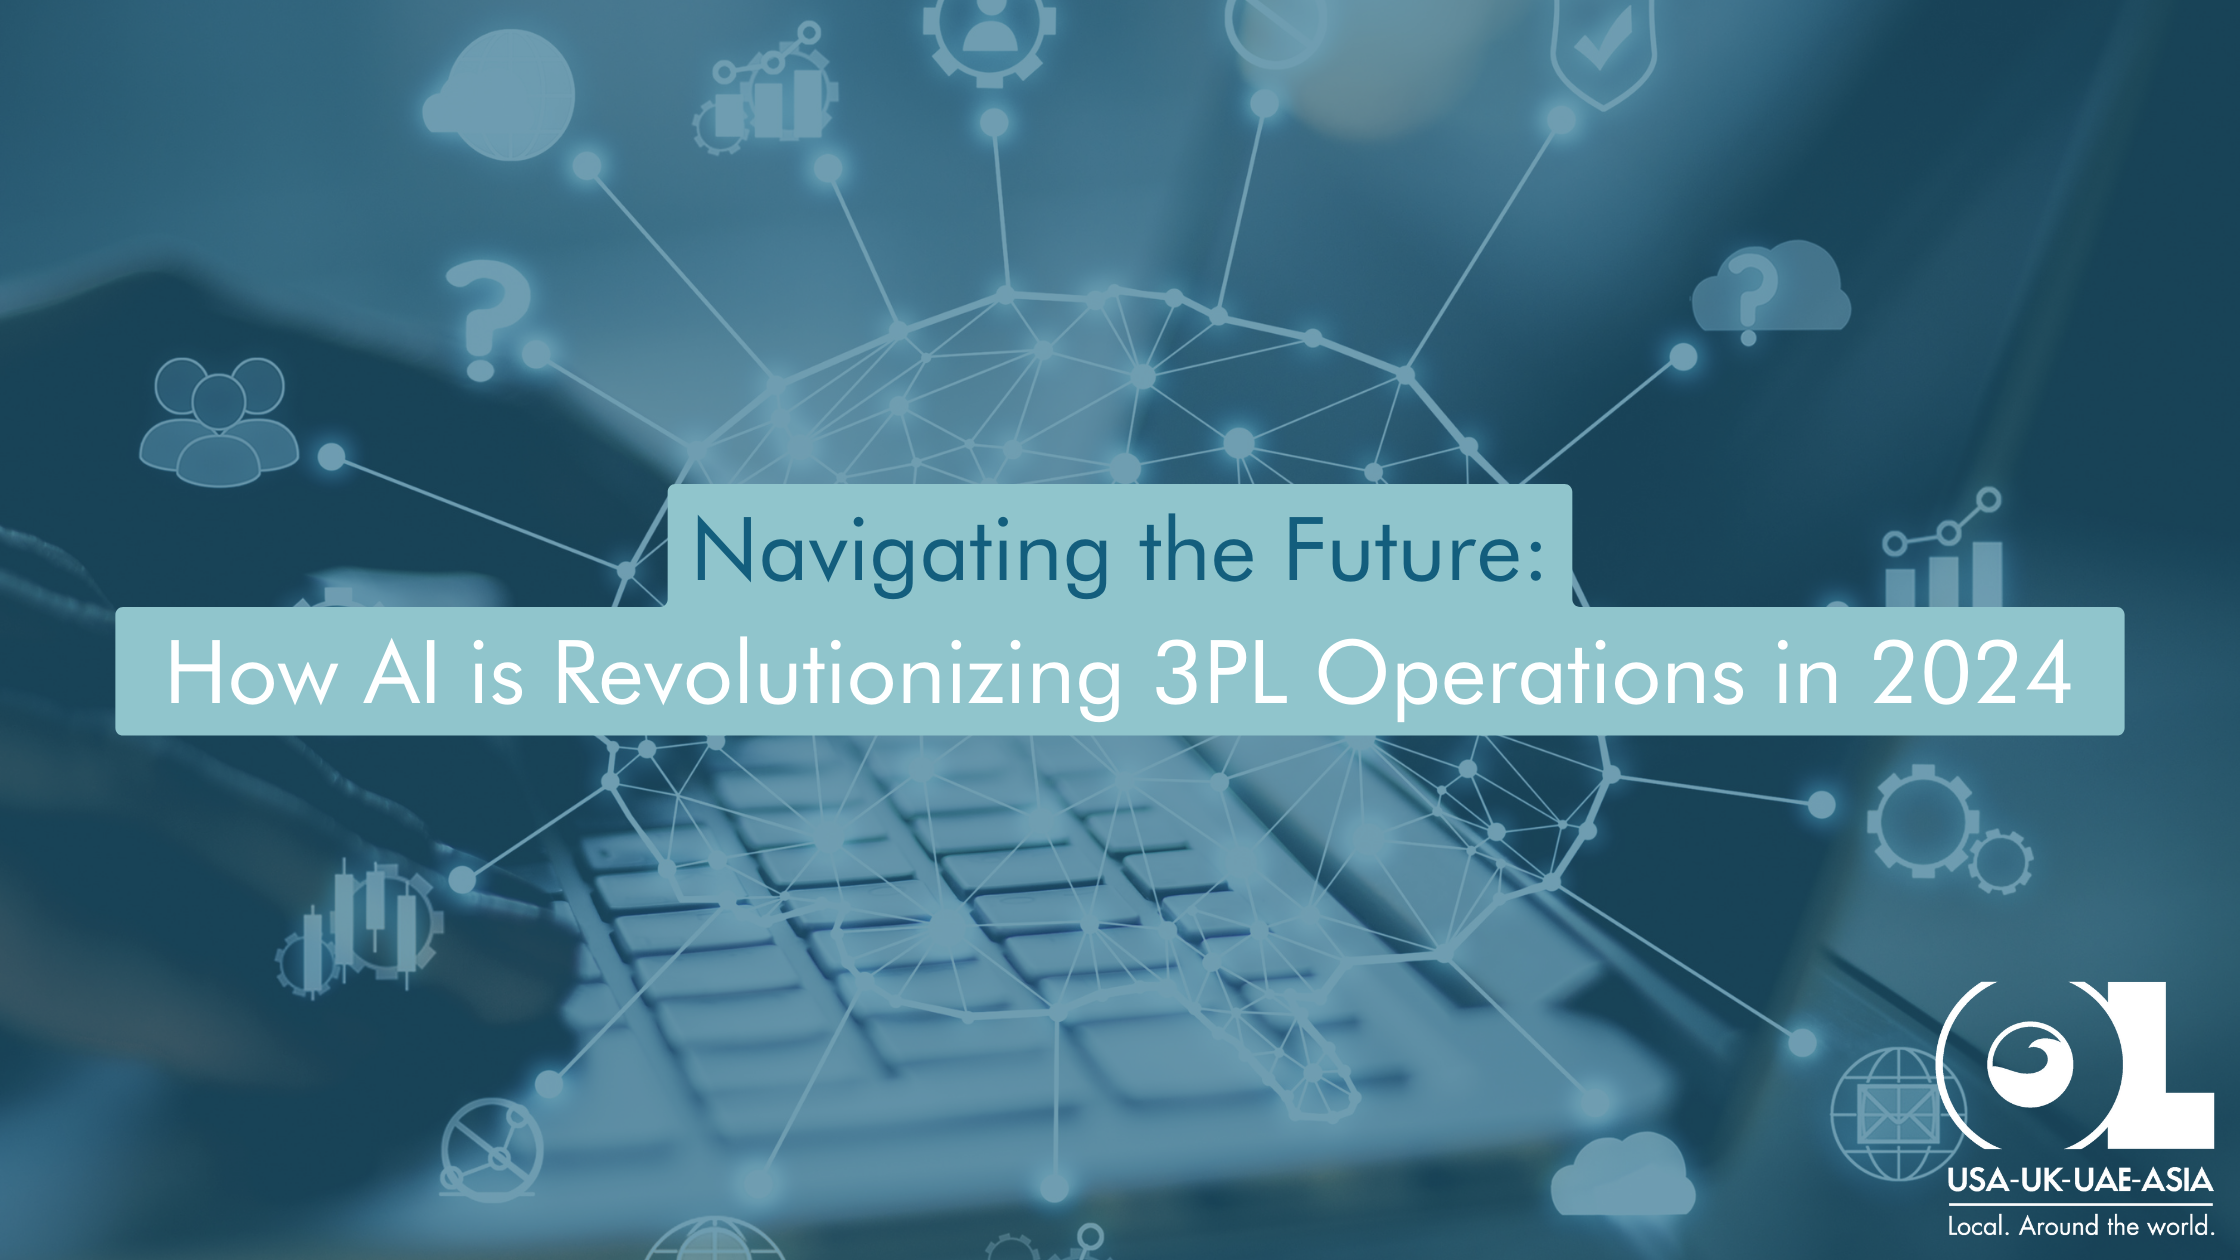 Navigating-the-Future-How-AI-is-Revolutionizing-3PL-Operations-in-2024-OL-USA